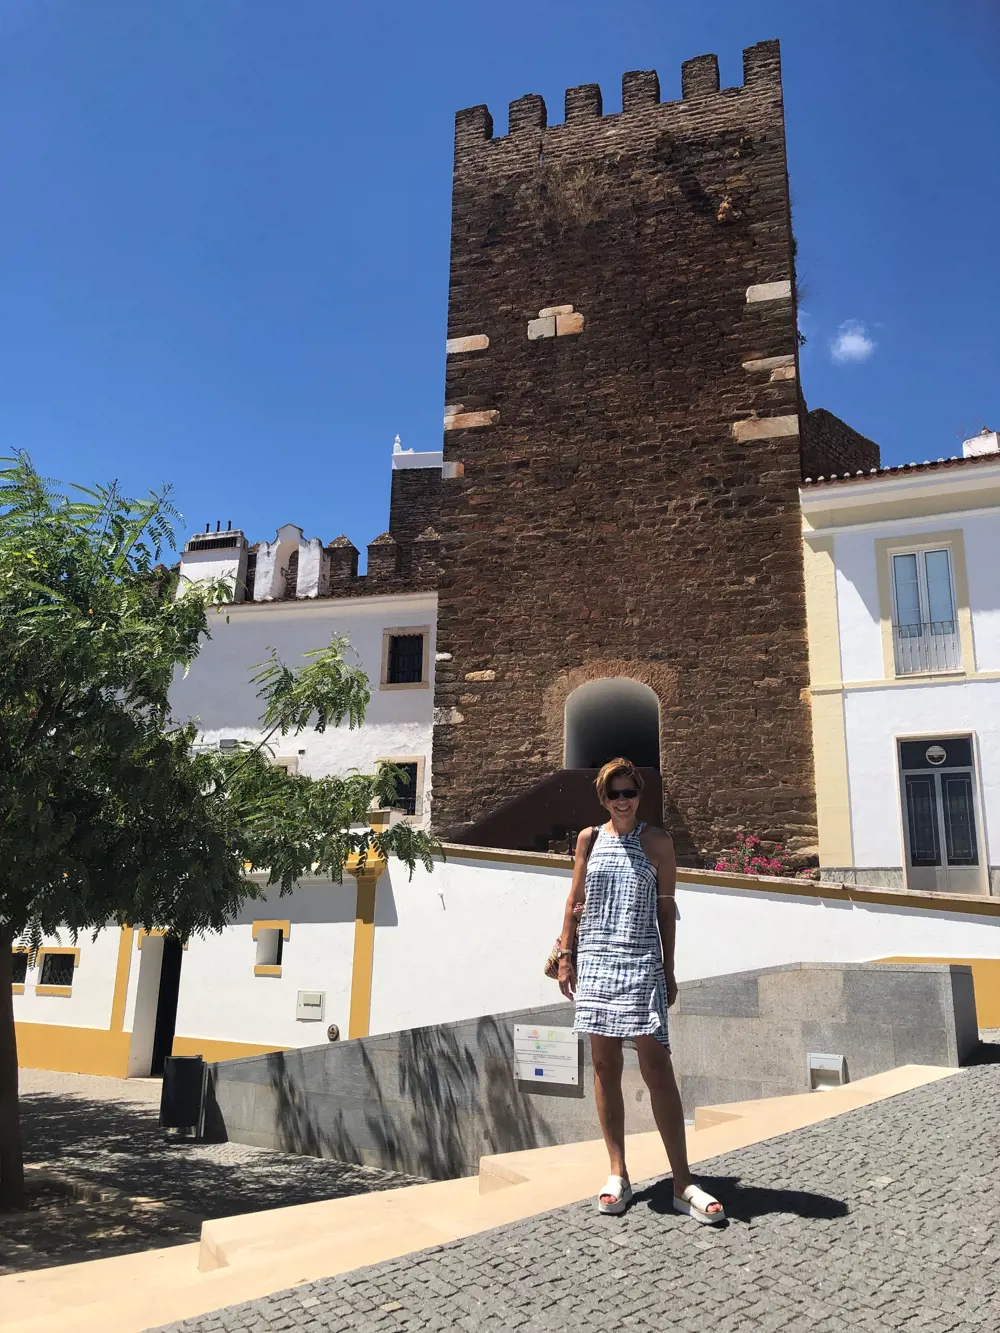 Dr Luisa Freitas dos Santos standing in front of a castle in a Portuguese town on a sunny day.